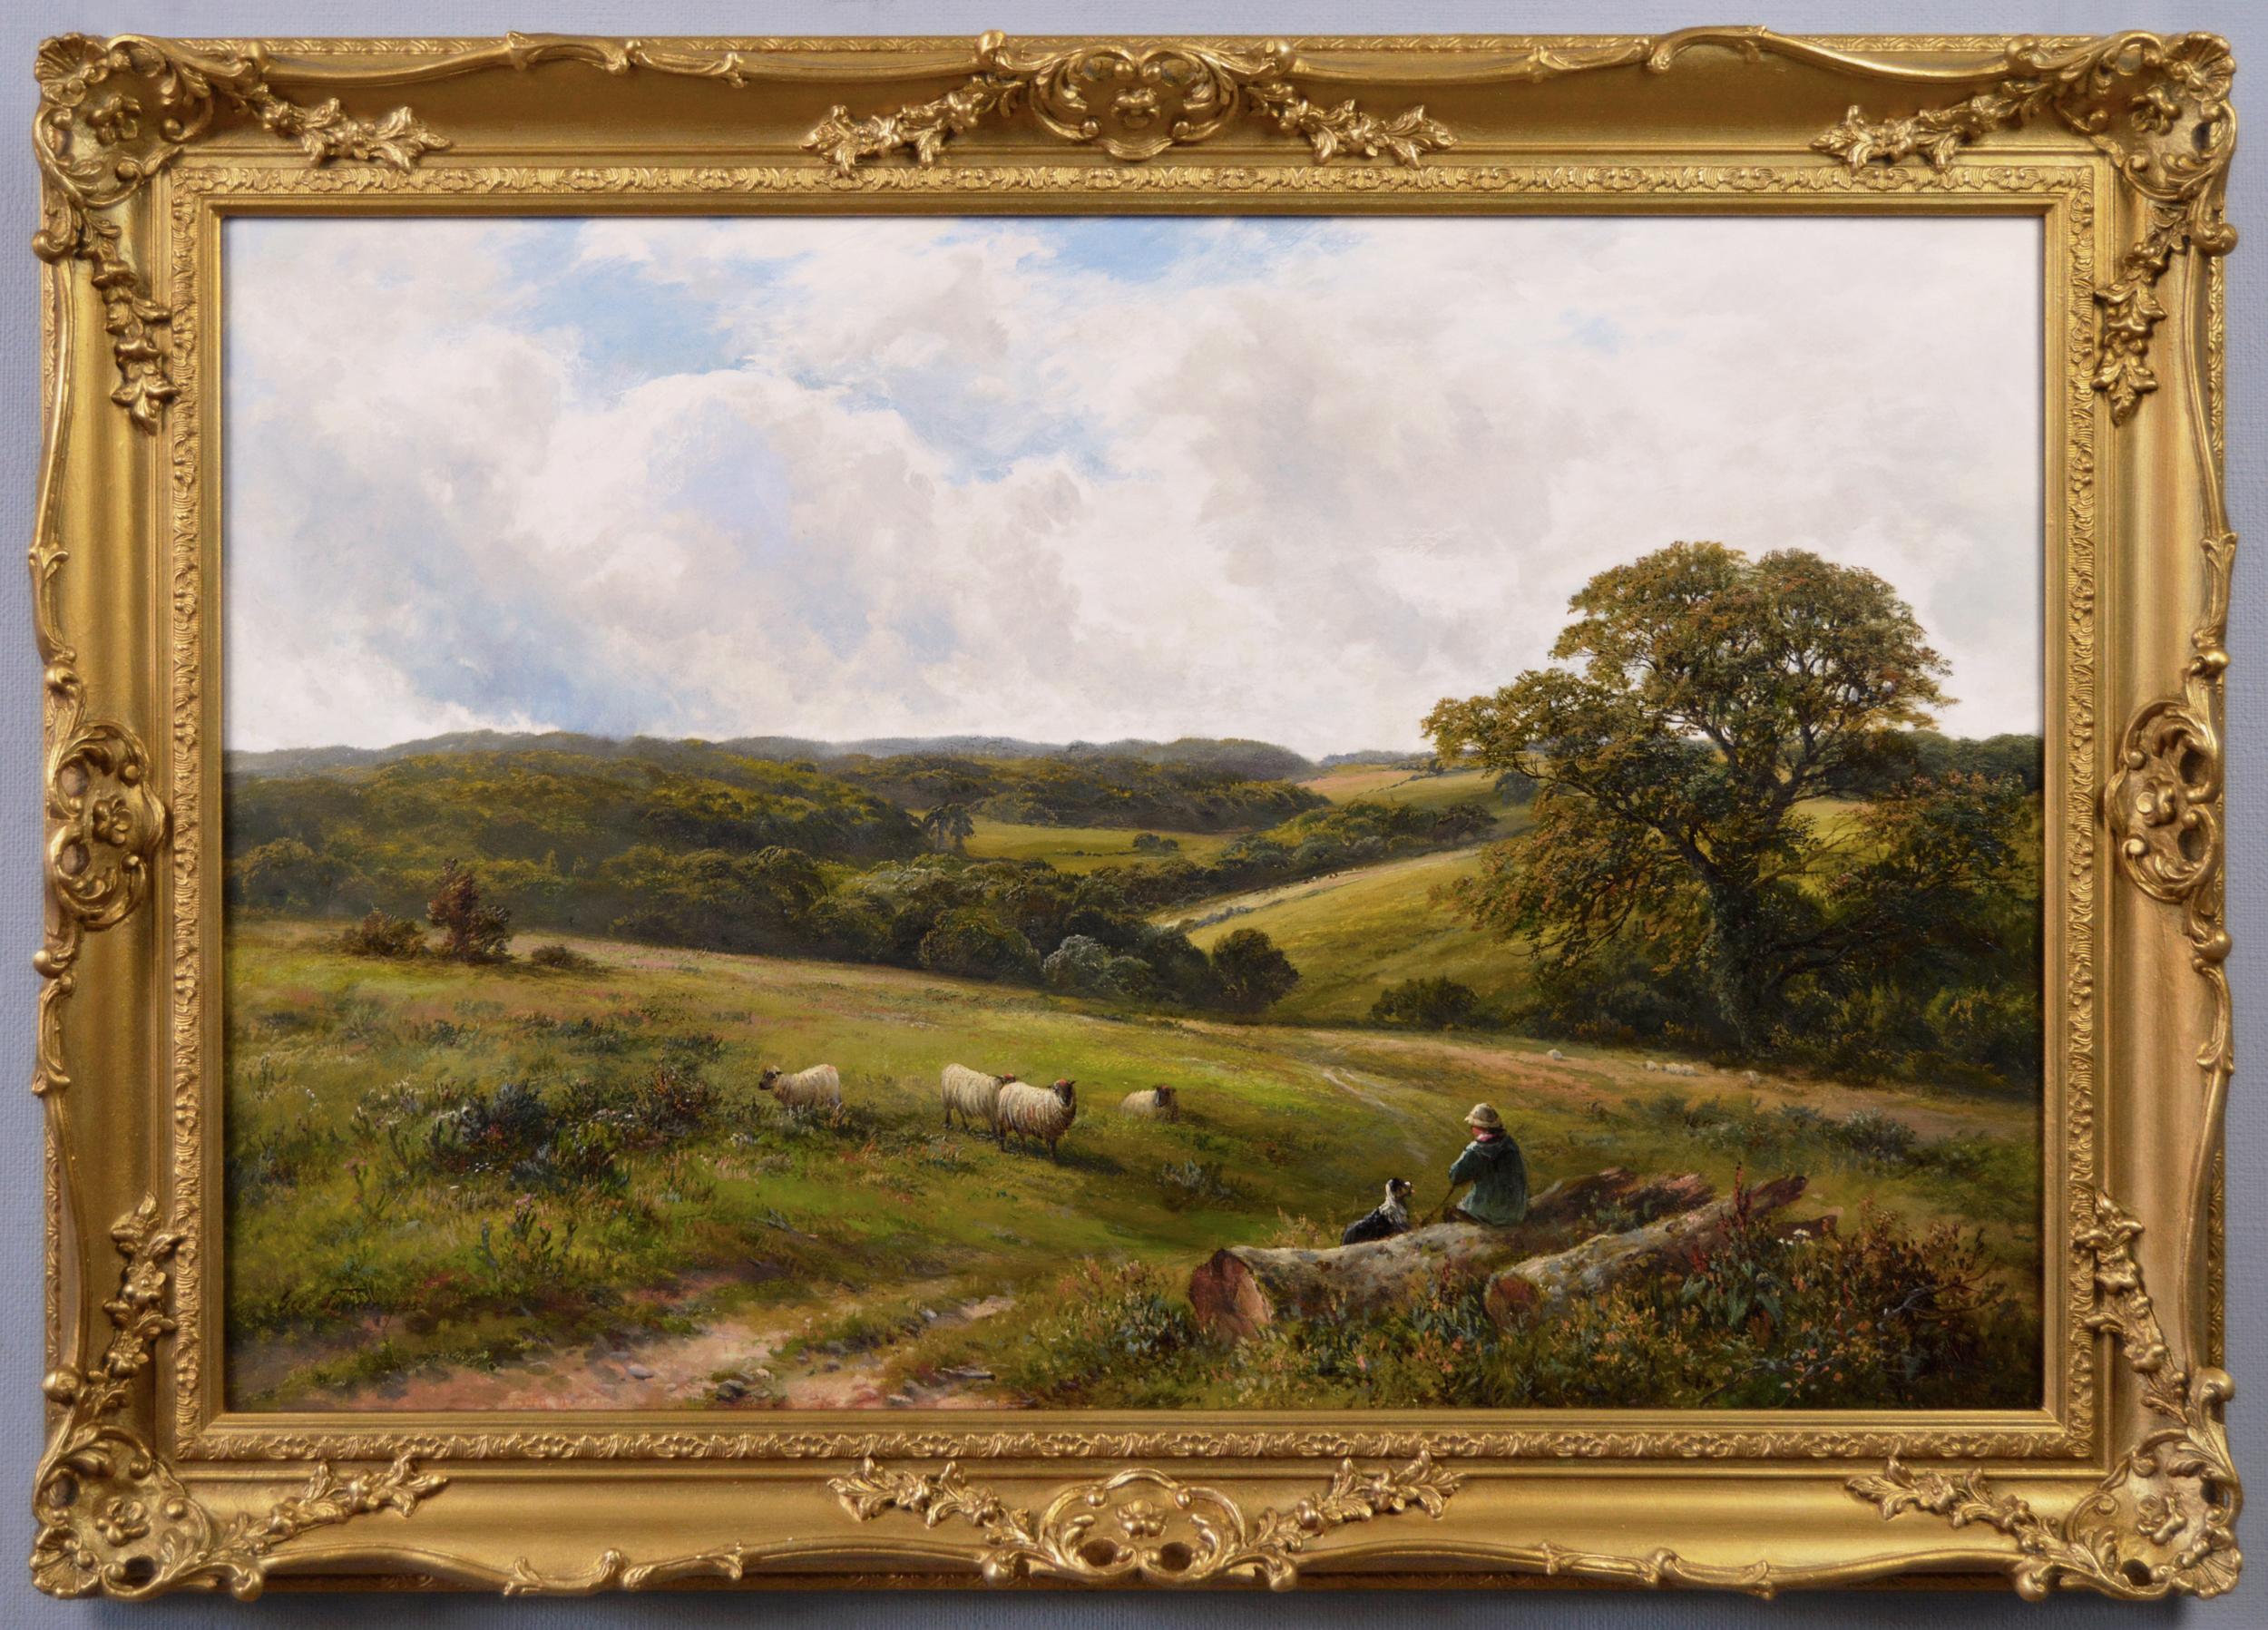 19th Century landscape oil painting of a shepherd & sheep near a Derbyshire wood